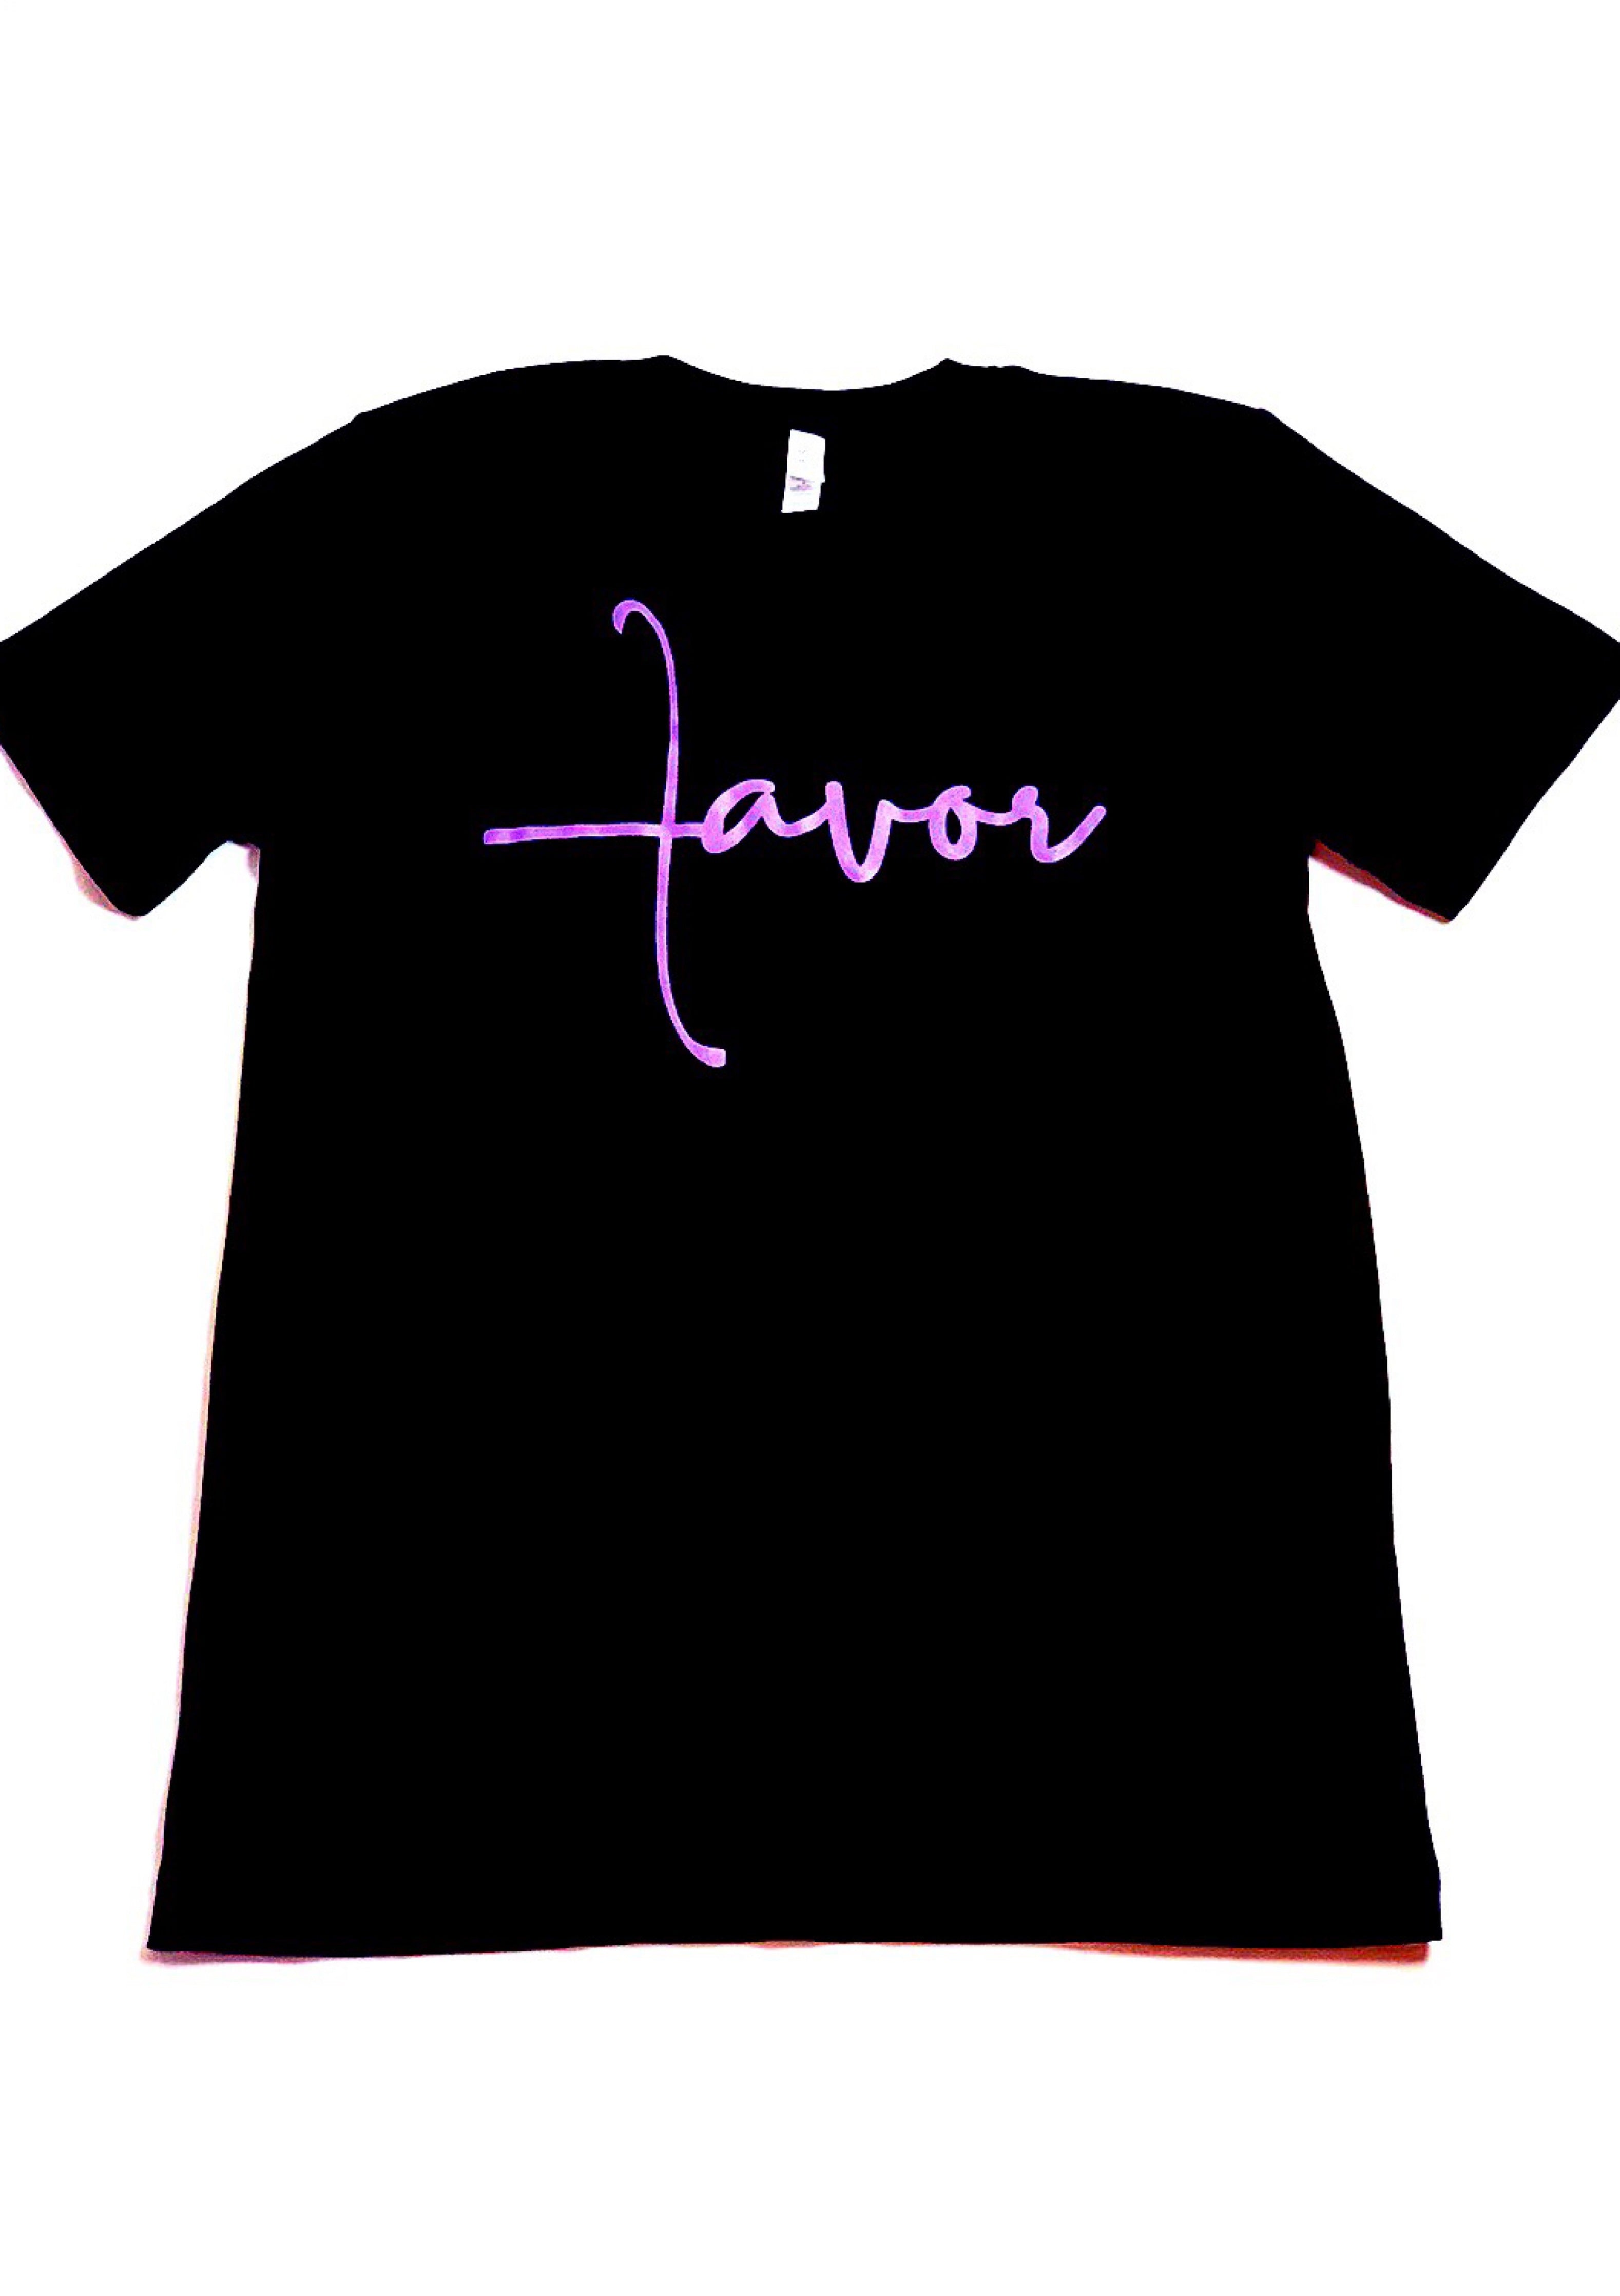 Favor T-Shirt Purple and Black - Jewellery Unique Gifts & Accessories